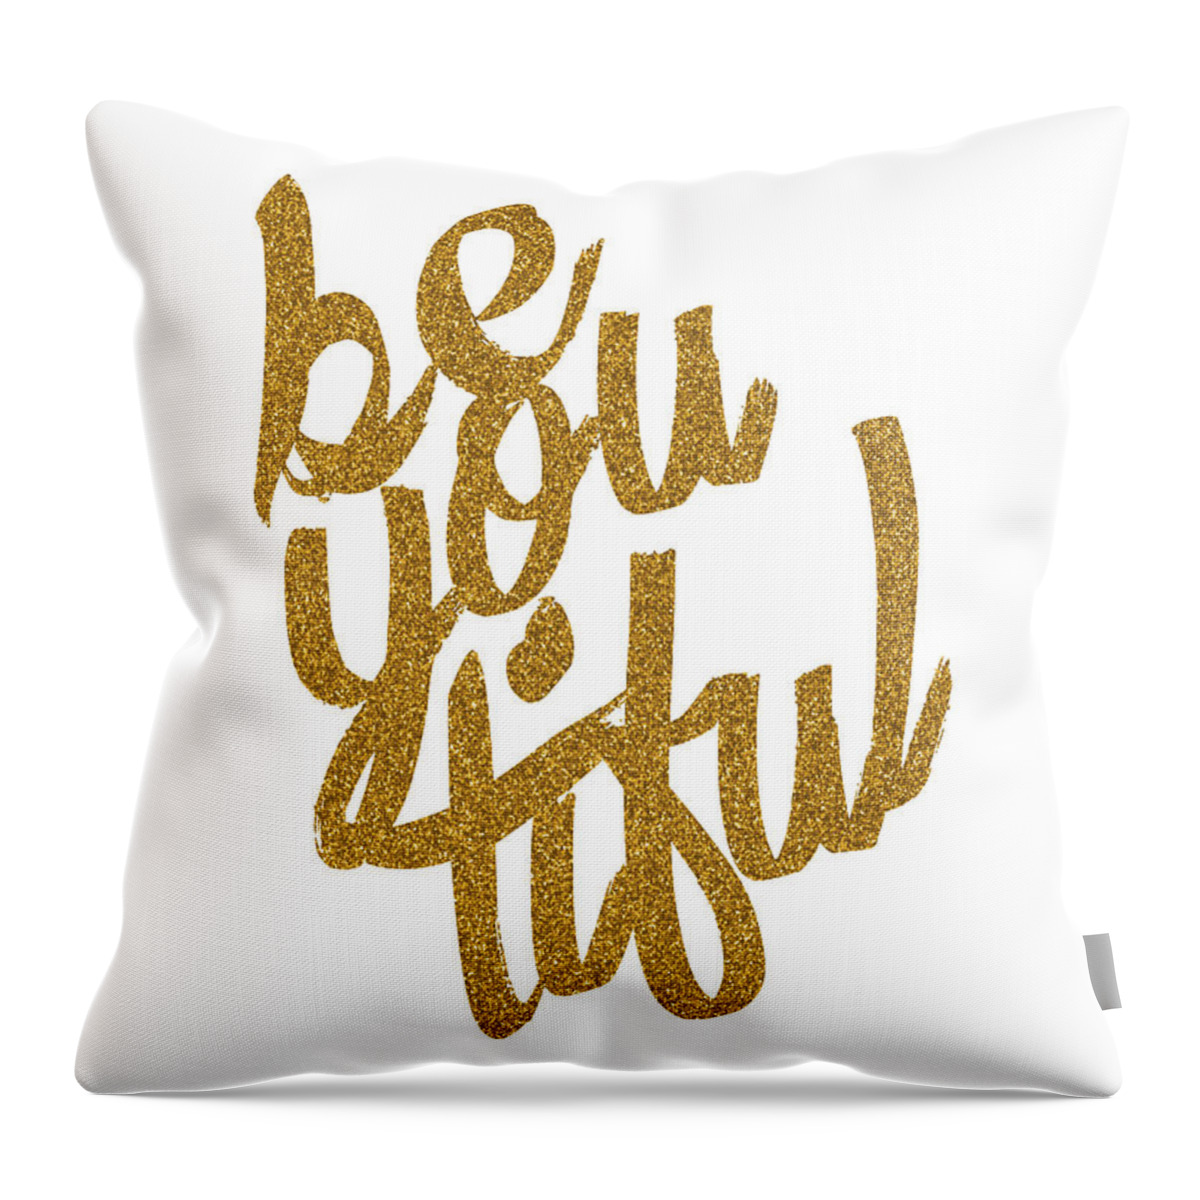 Beautiful Throw Pillow featuring the digital art Gold 'Beyoutiful' Typographic Poster by Jaime Friedman